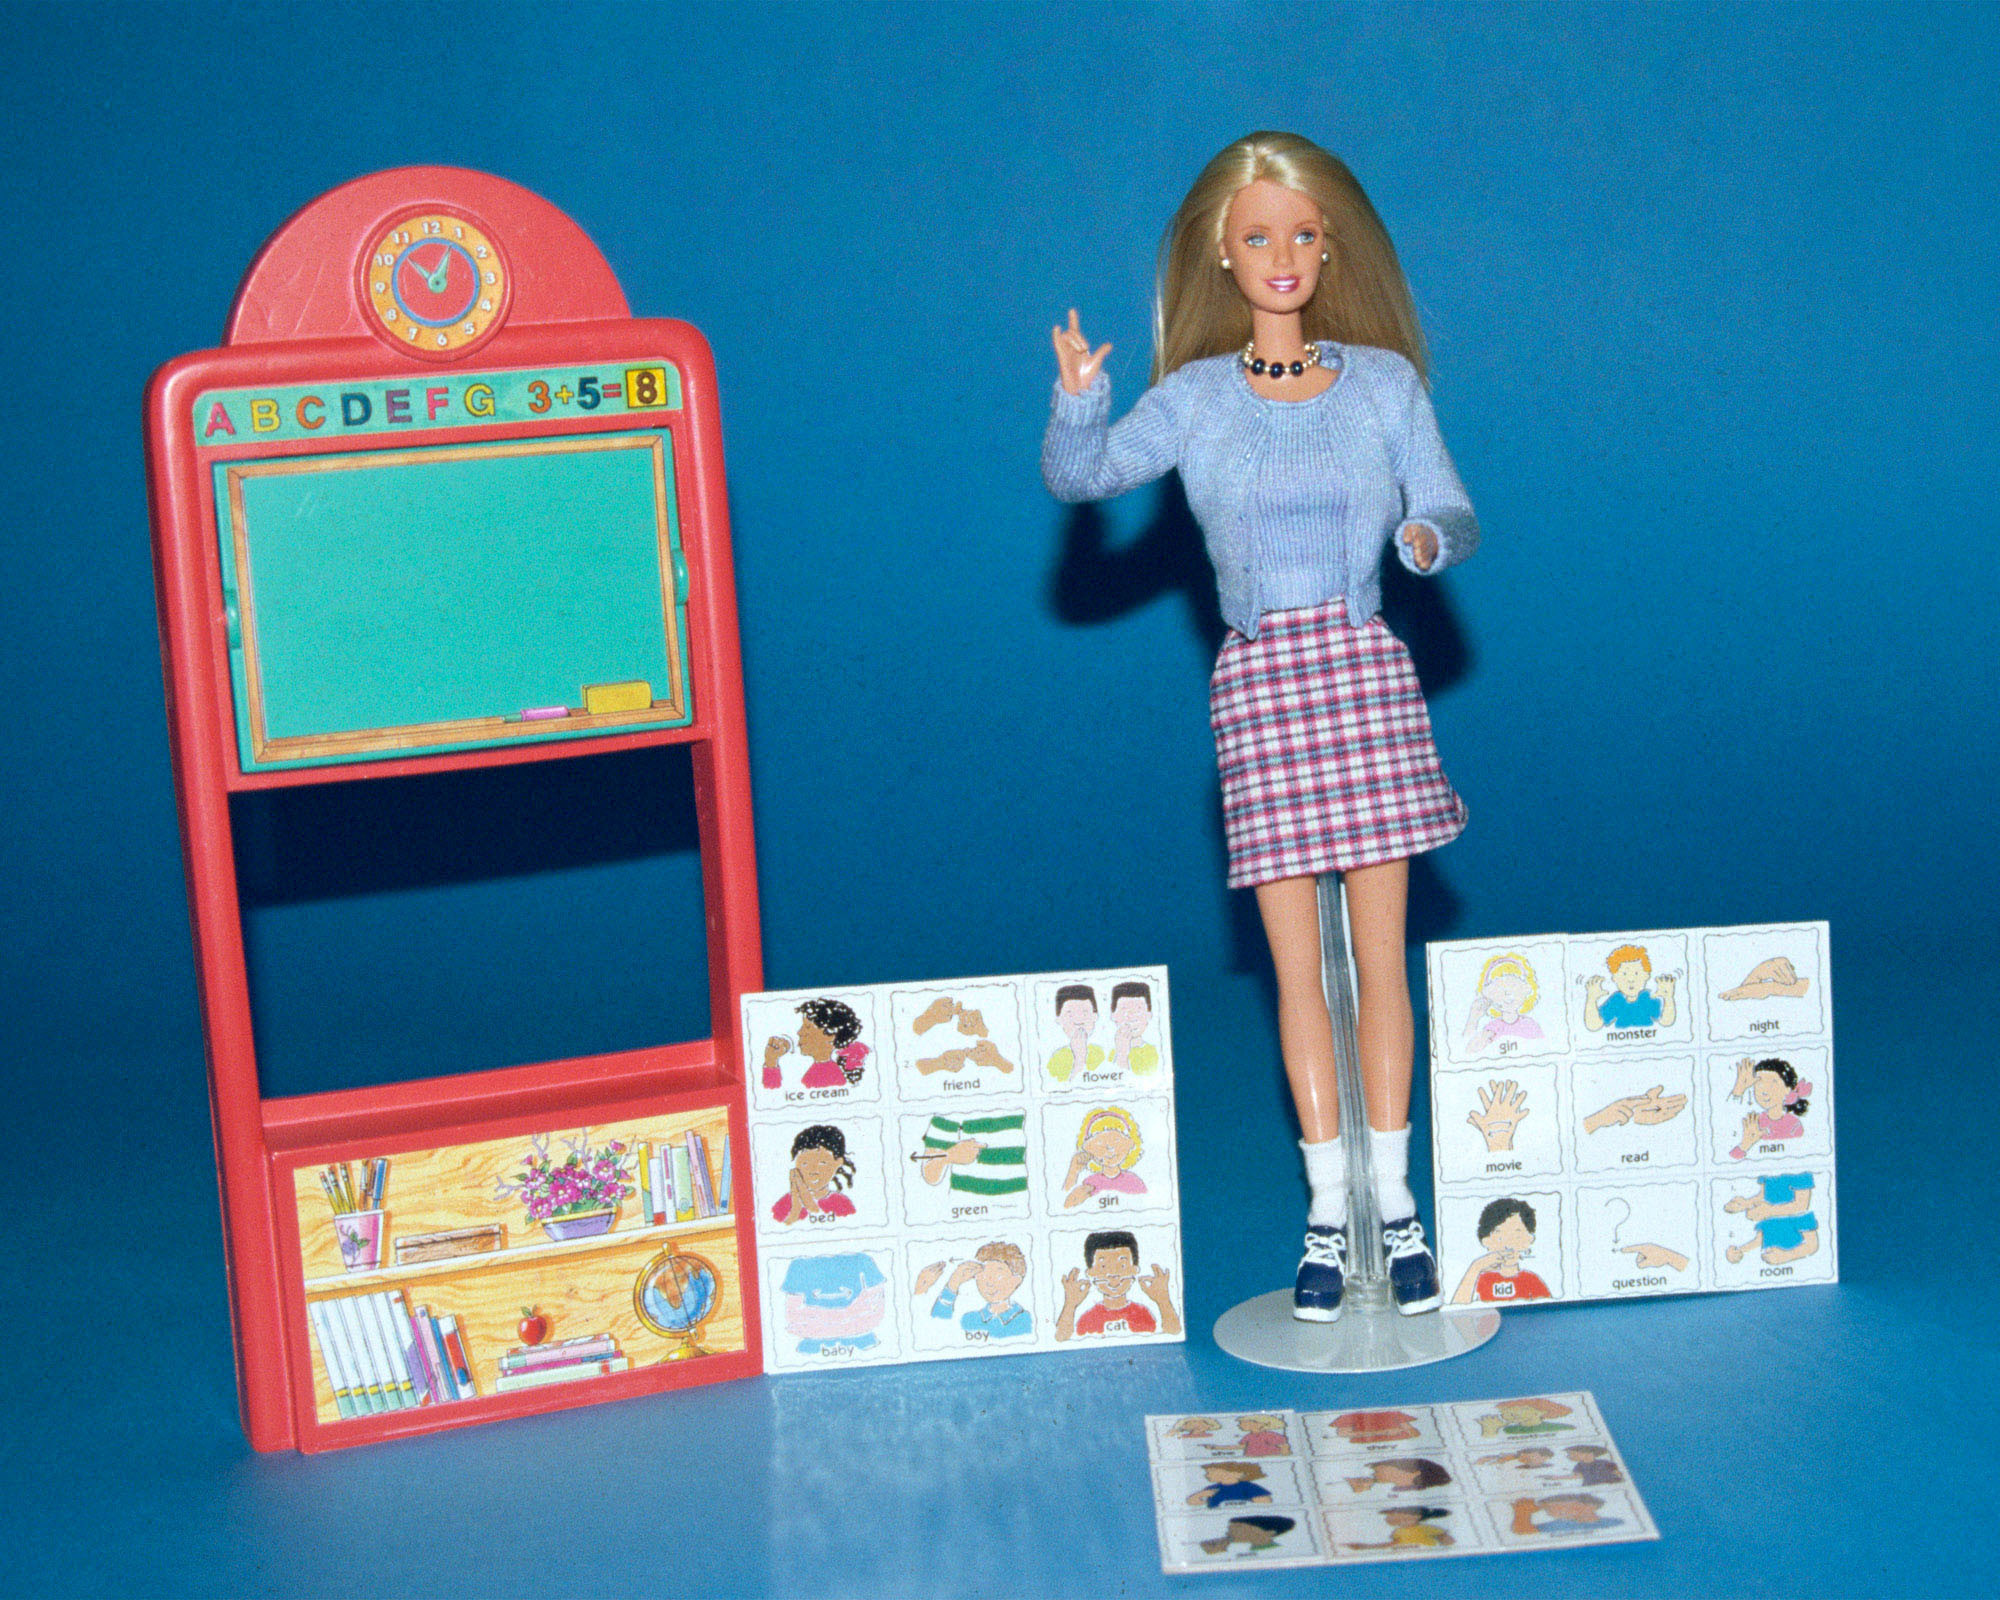 American Sign Language (ASL) Barbie was introduced in 2000. Mattel worked with the National Center on Deafness at California State University in Northridge to ensure the accuracy of the doll's hand signs. The doll was available exclusively at Toys 